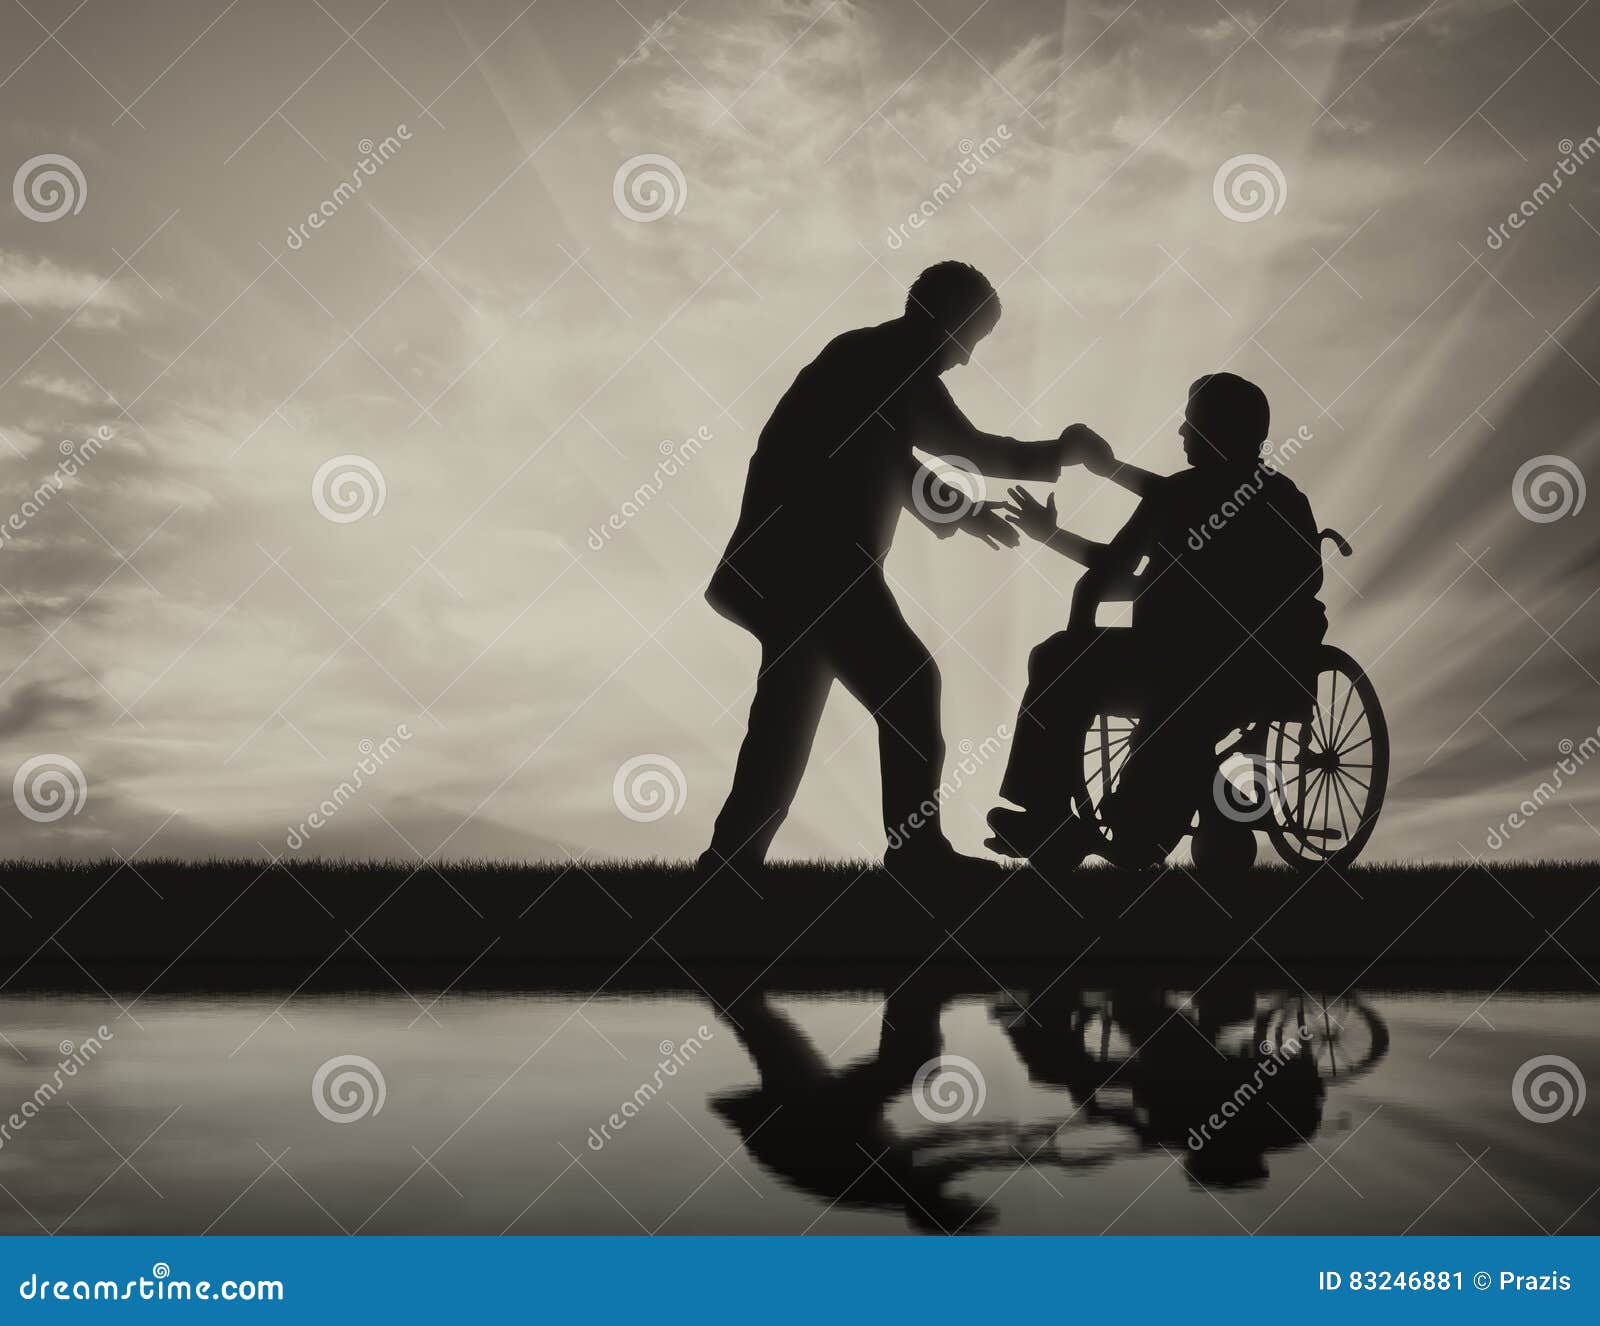 Man Helps Person in Wheelchair Stock Image - Image of victory, helpless ...